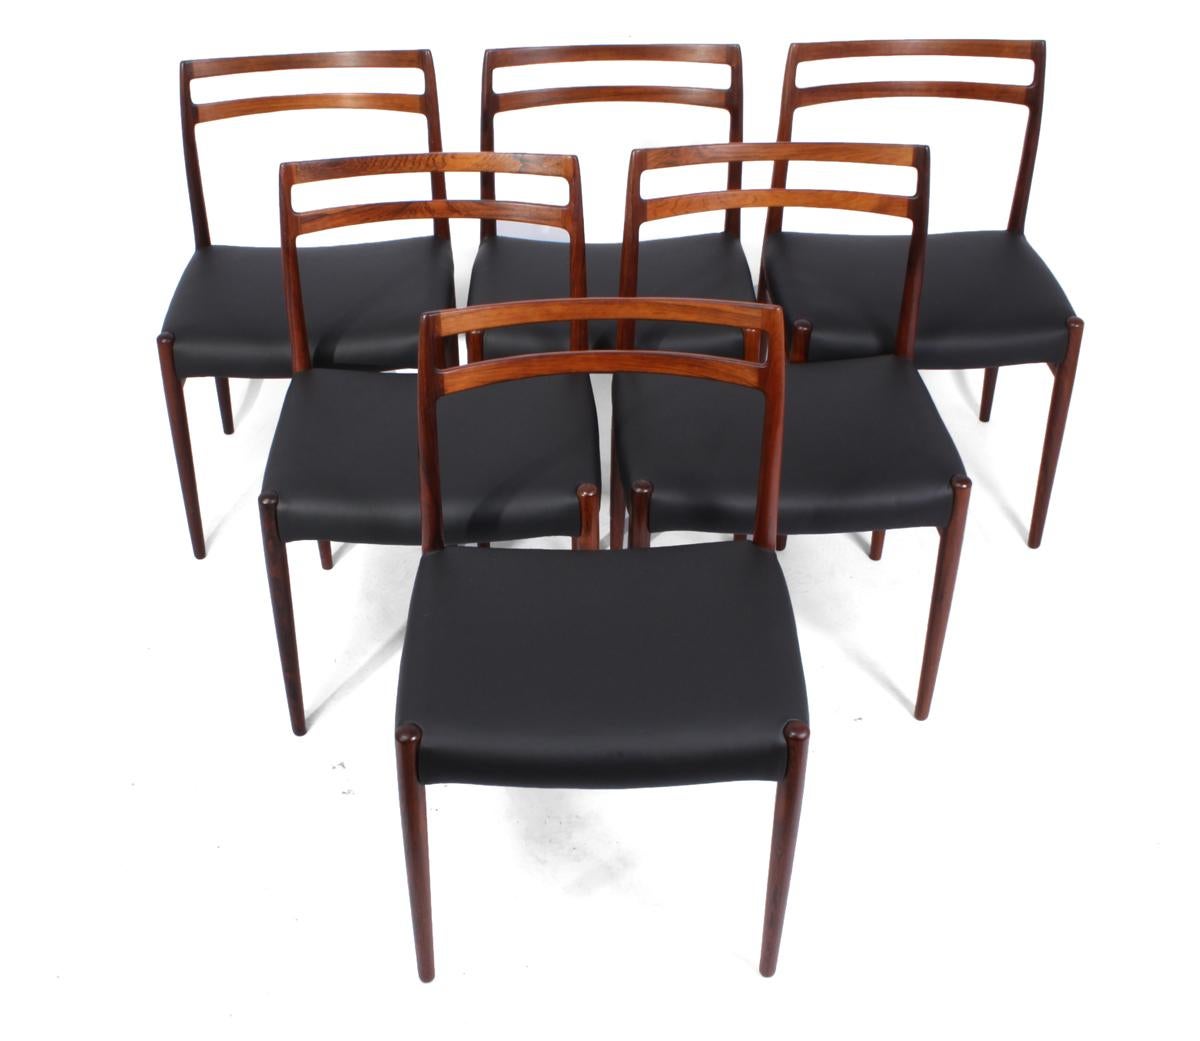 Model 146 rosewood dining chairs by Alf Aarseth
A set of 6 model 146 dining chairs designed by Alf Arseth and produced in Norway by Gustav Bahus in the 1960's they are solid rosewood with no loose joints or breaks the seats are brand new full